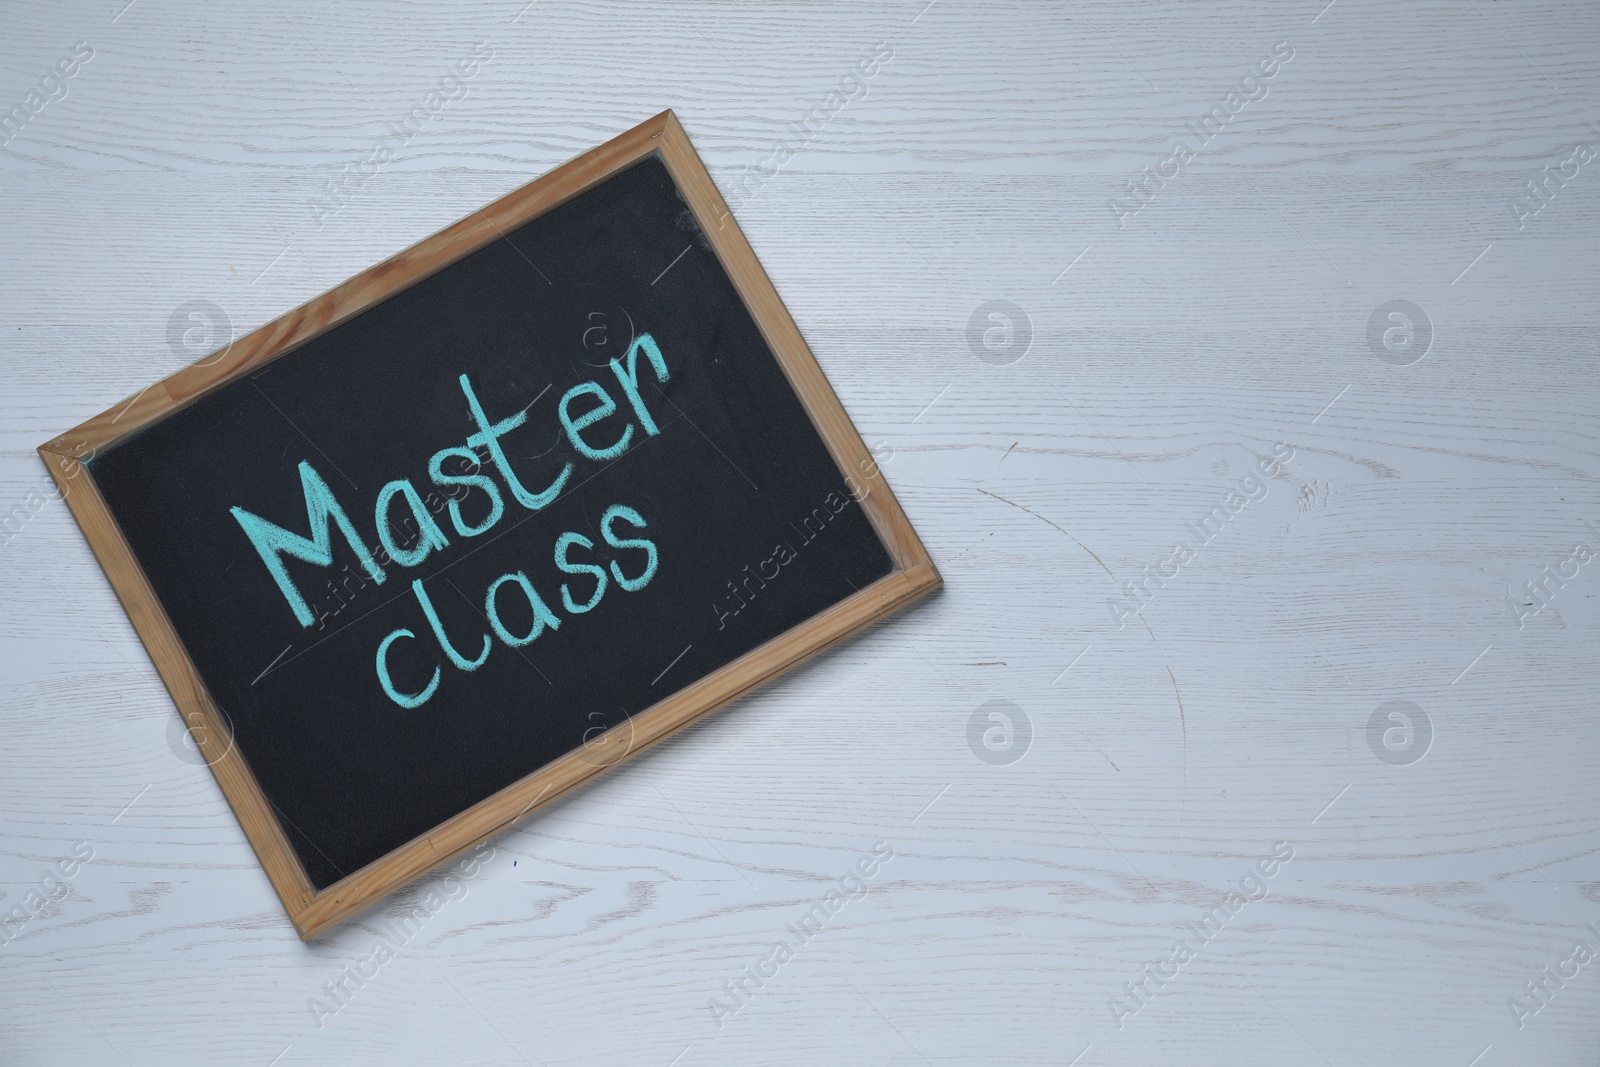 Photo of Blackboard with phrase Master class on white wooden table, top view. Space for text